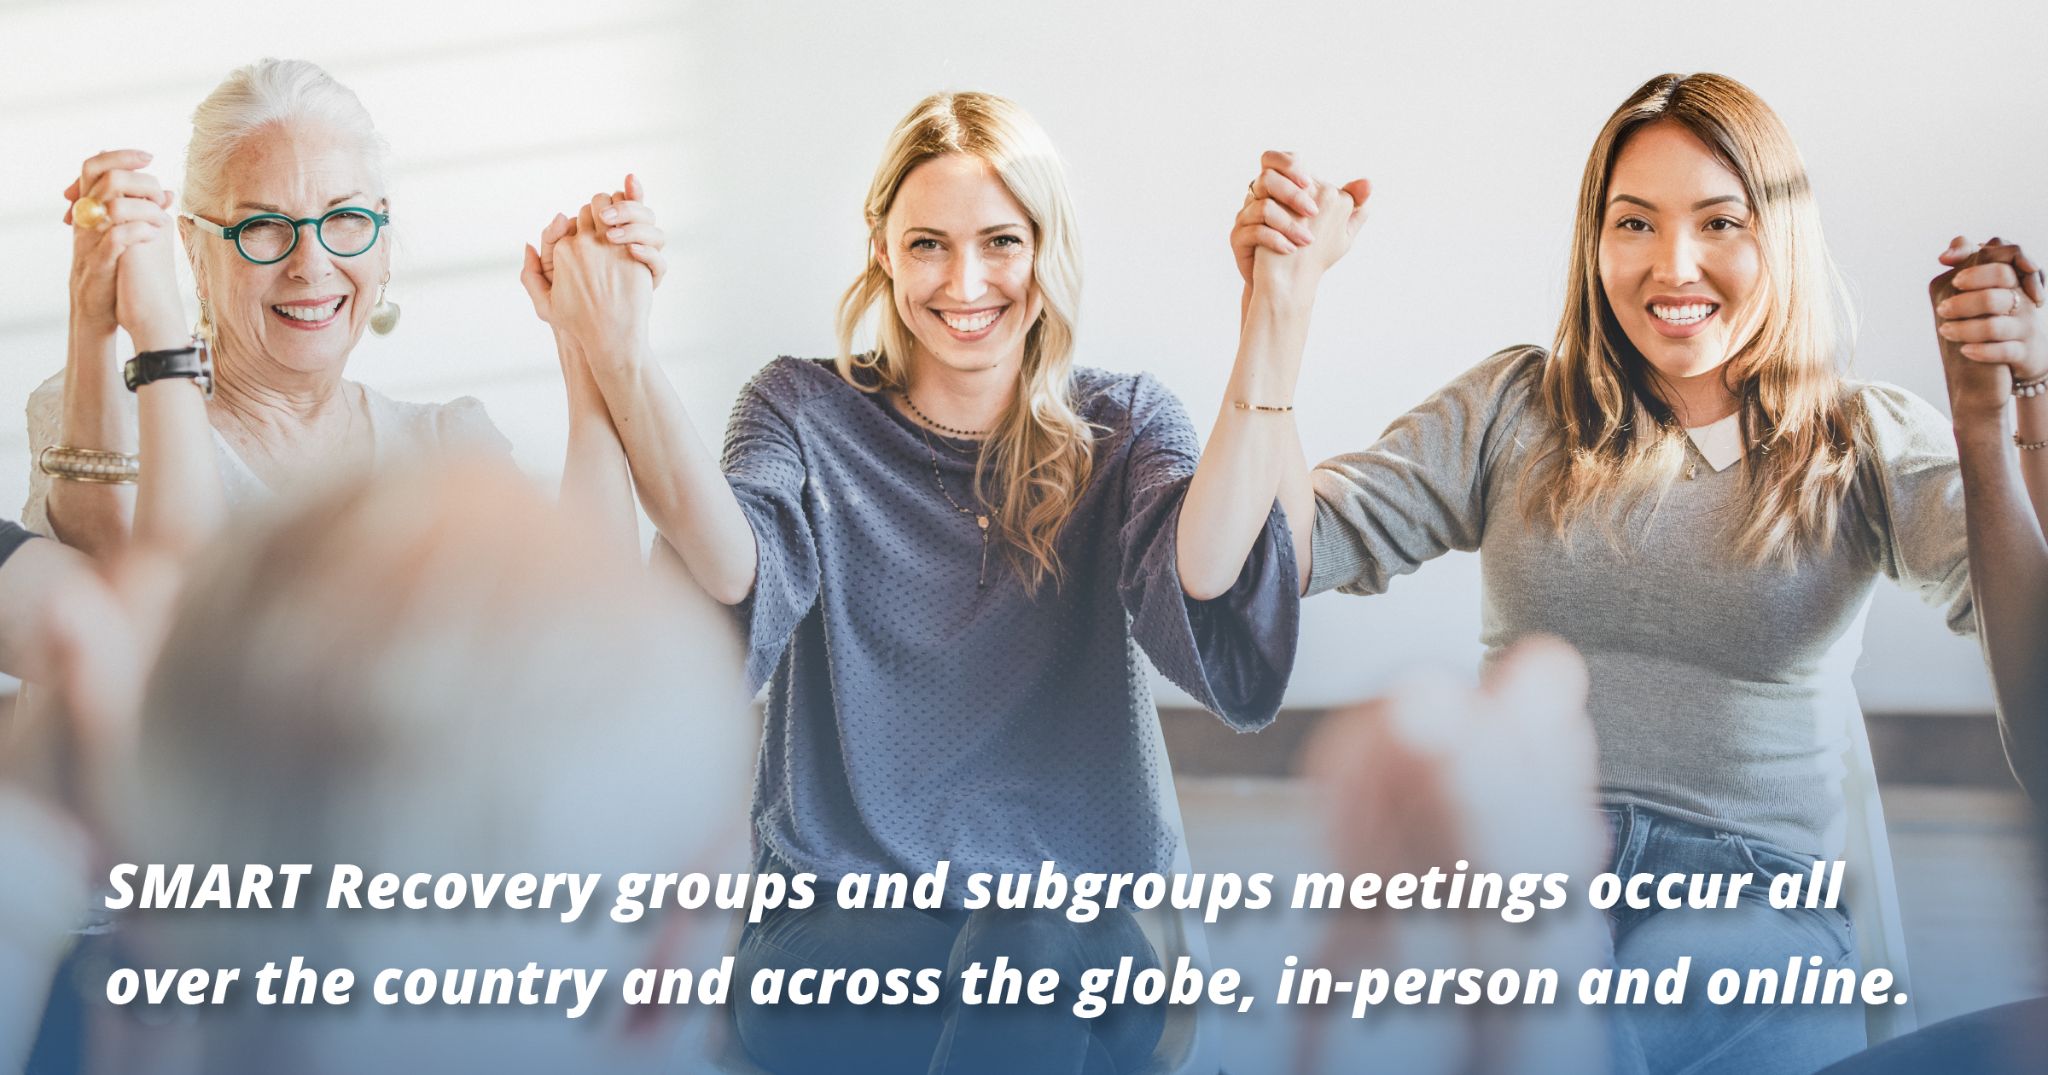 smart recovery groups and subgroups meetings occur all over the country and across the globe, in-person and online